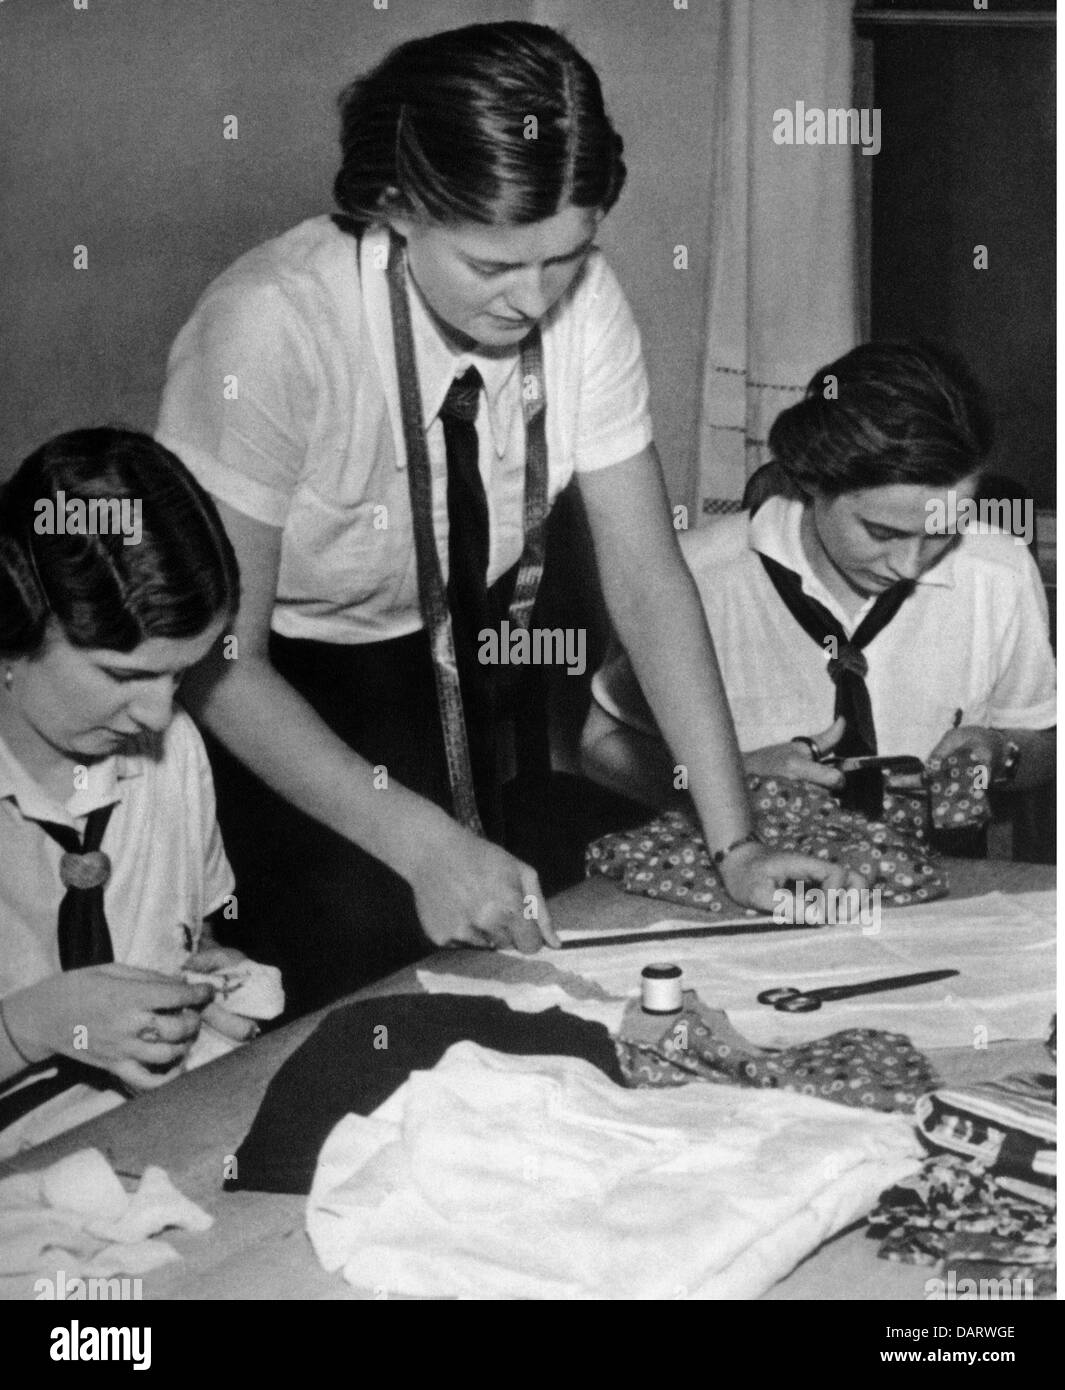 National Socialism, organisations, League of German Girls (Bund Deutscher Maedel, BDM), BDM maidens tayloring cloth, late 1930s, 30s, clothing, cutting, housework, handwork, girls, youth, people, Nazi Germany, Third Reich, 20th century, historic, historical, Madel, Mädel, people, Additional-Rights-Clearences-Not Available Stock Photo